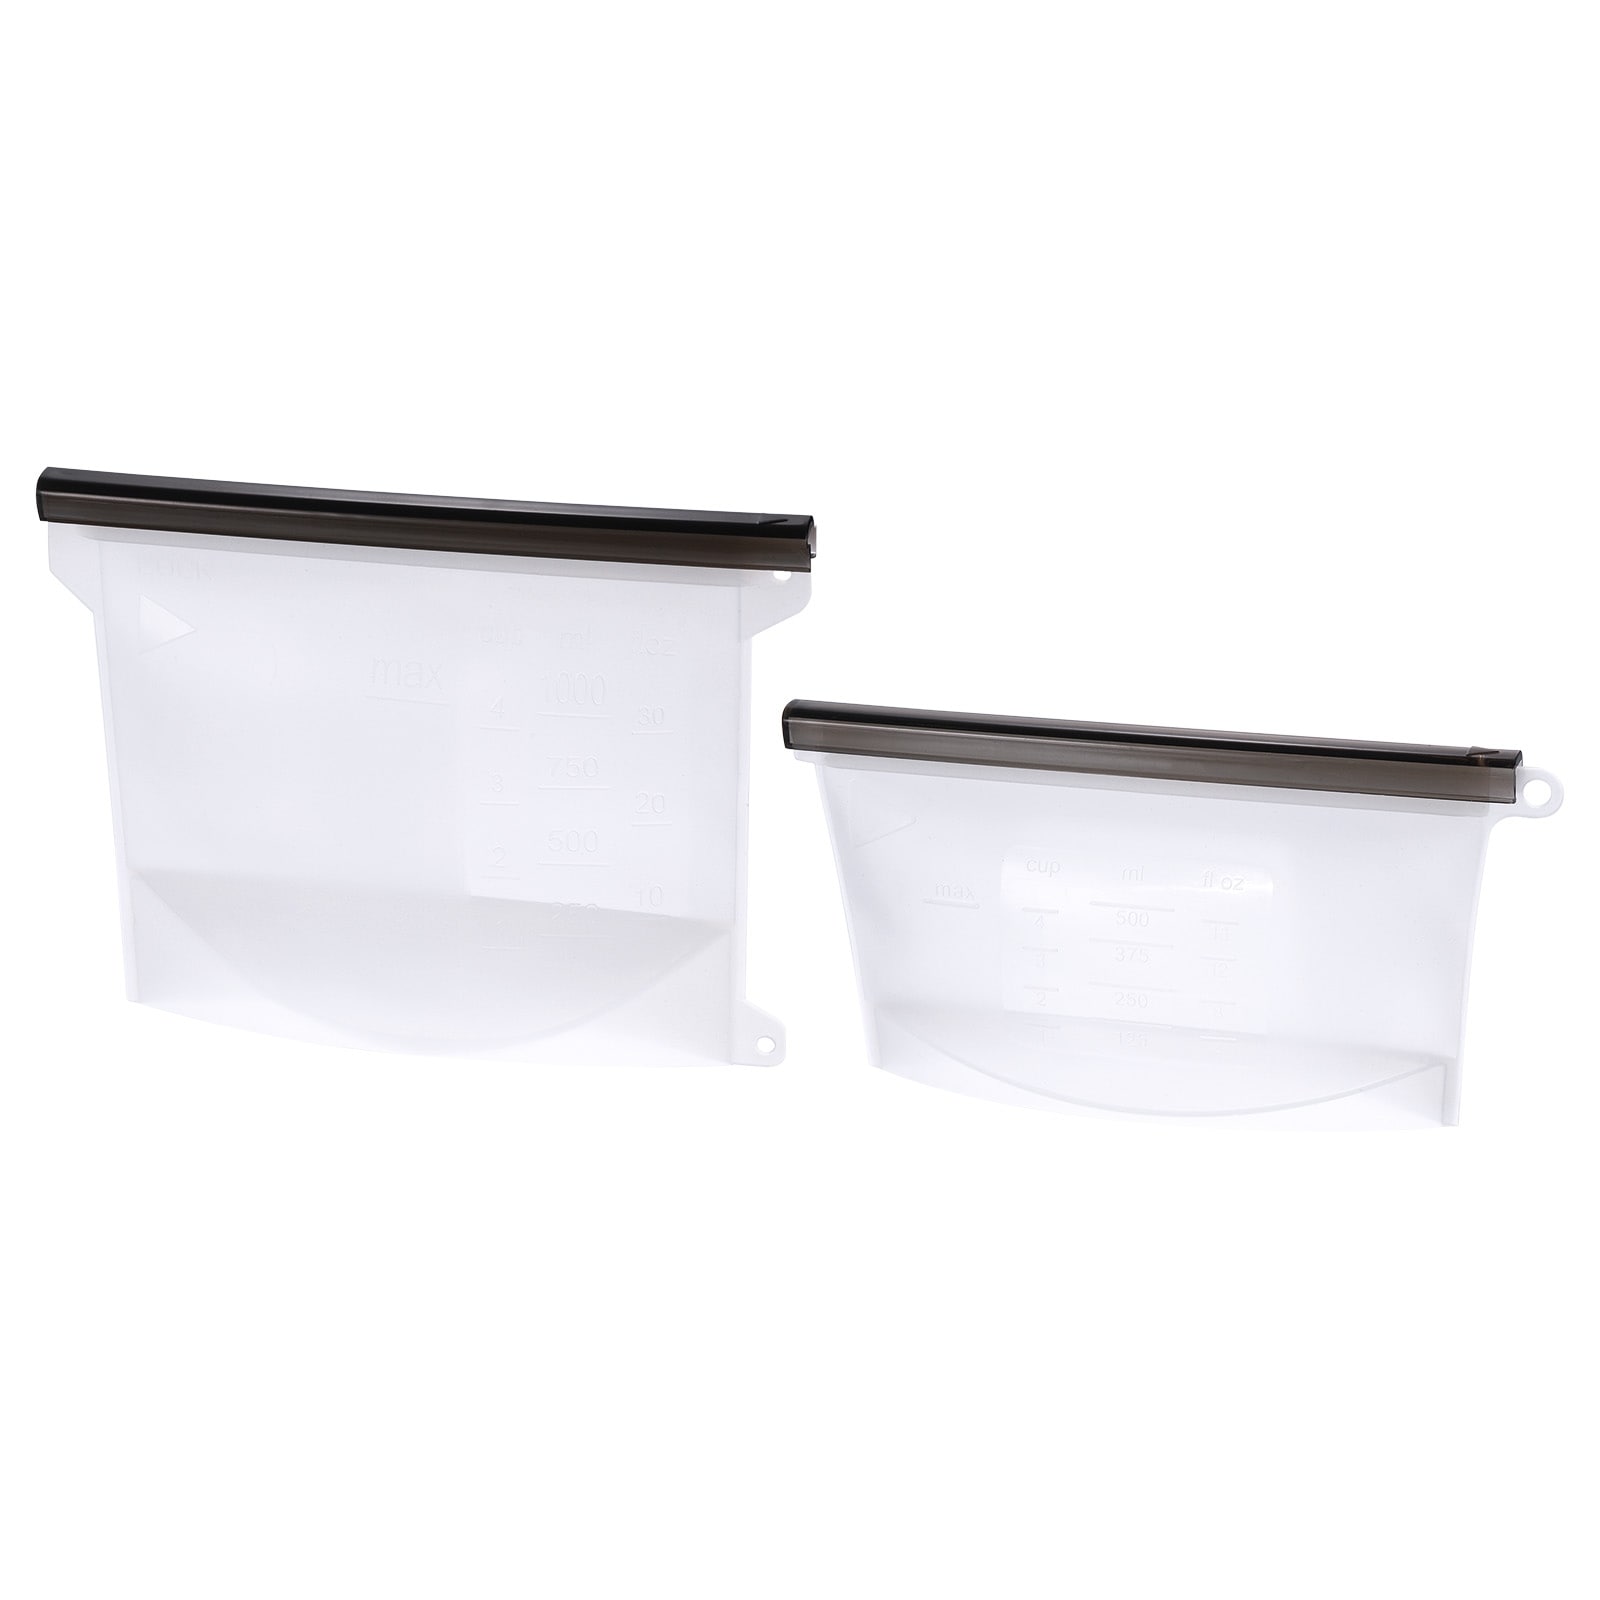 Silicone Food Storage Containers Leakproof Reusable Freezer Bags-White(2PCS) - White